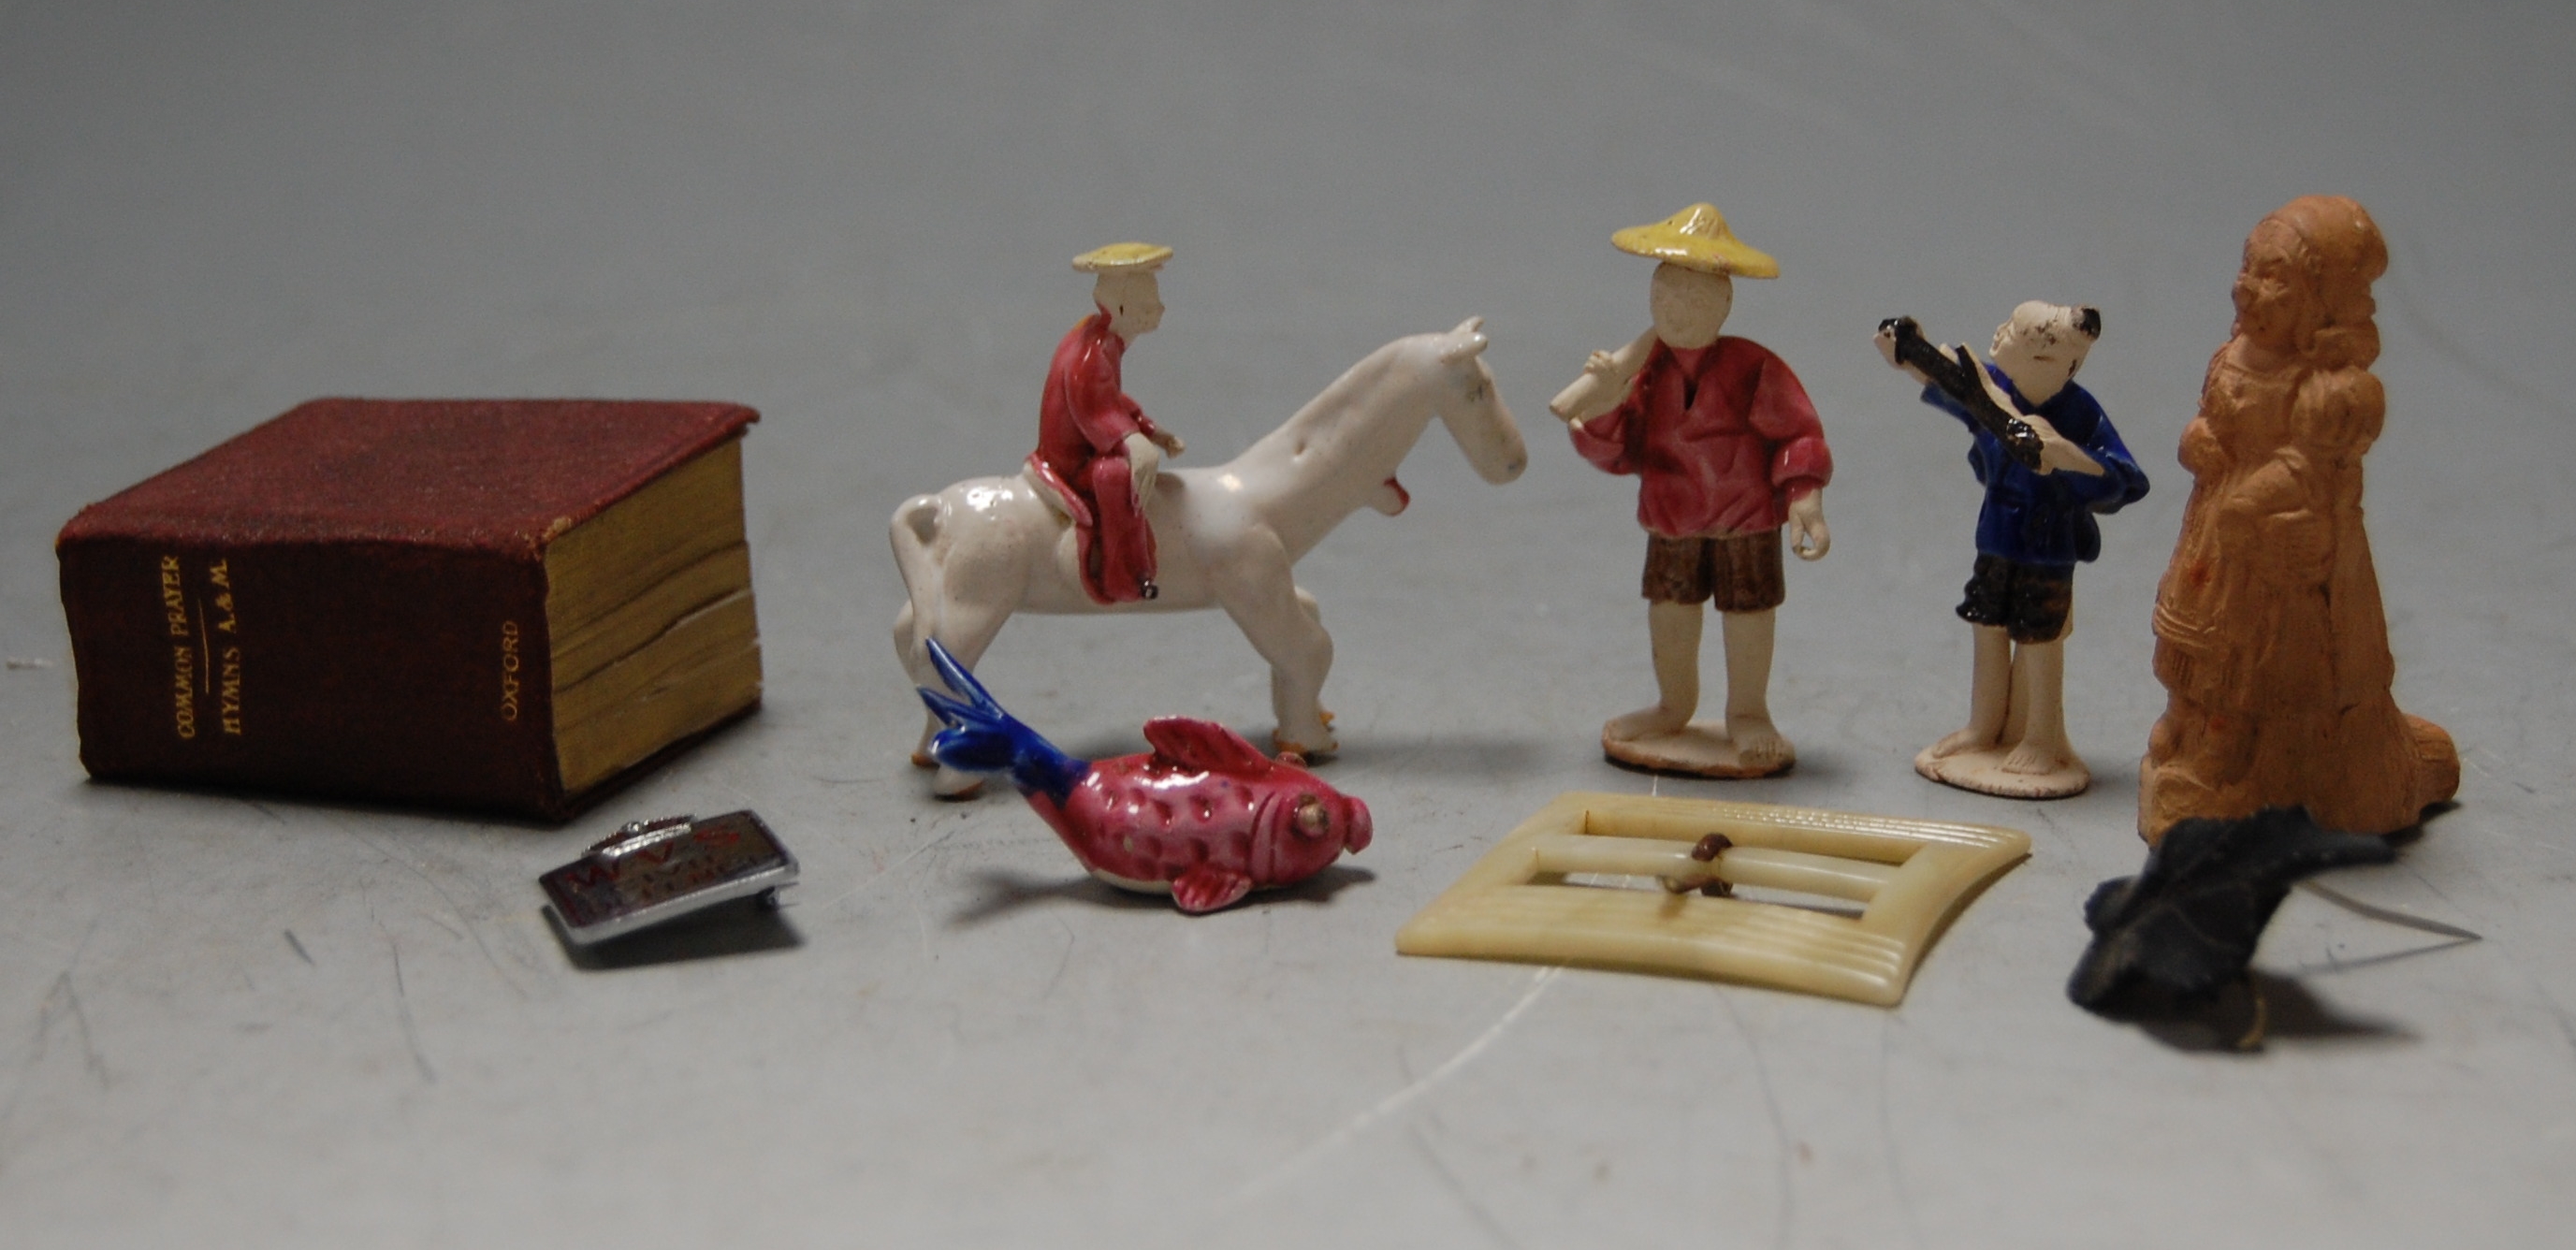 A Miniature Book of Common Prayer, together with various Chinese military figures etc